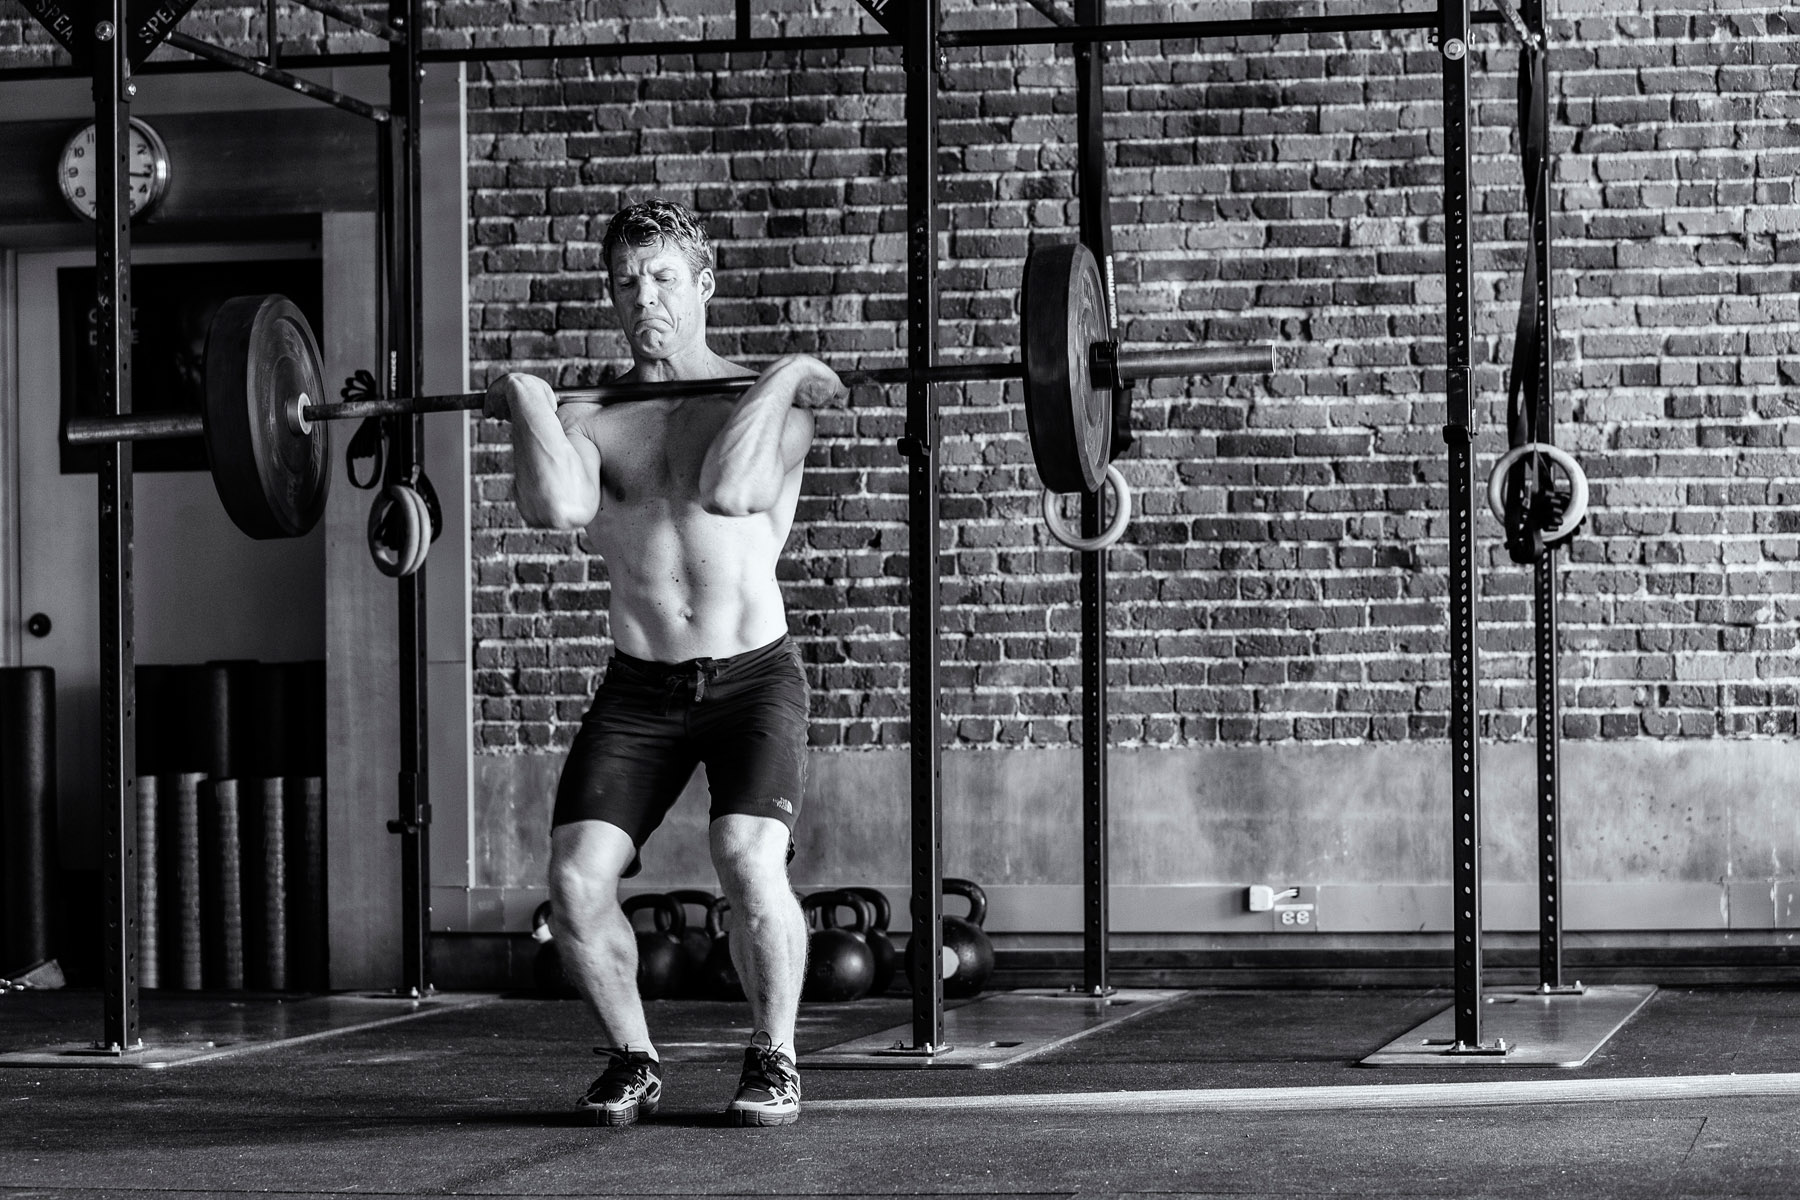  Fitness: Michael Hildebrand lifting in a crossfit gym, Seattle 